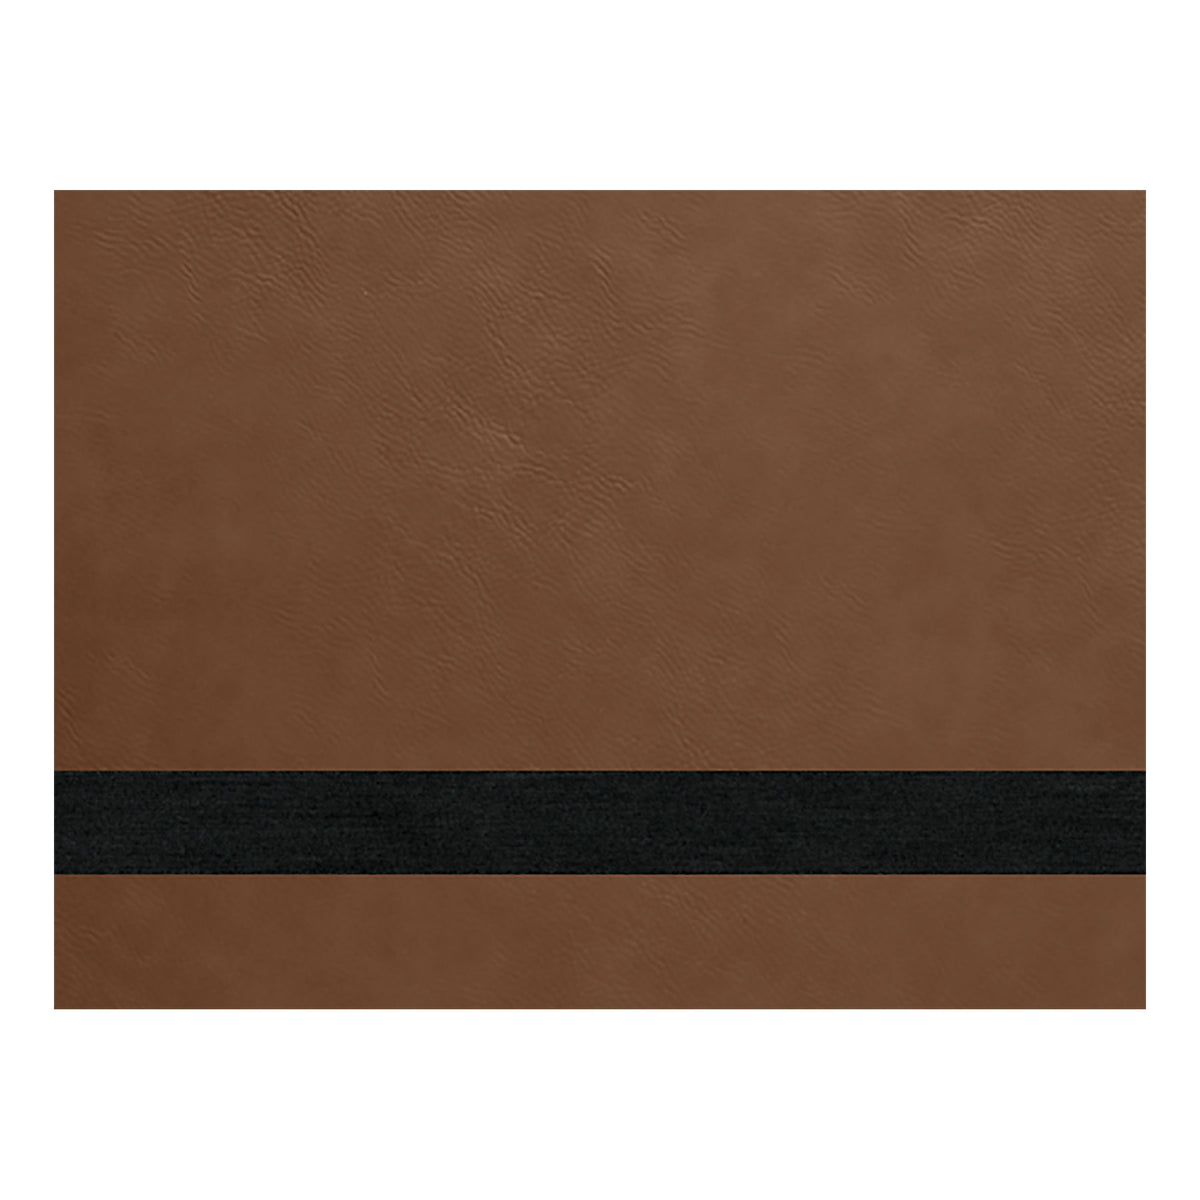 VARIETY PACK HYDBOND LEATHERETTE SHEETS (12x24)